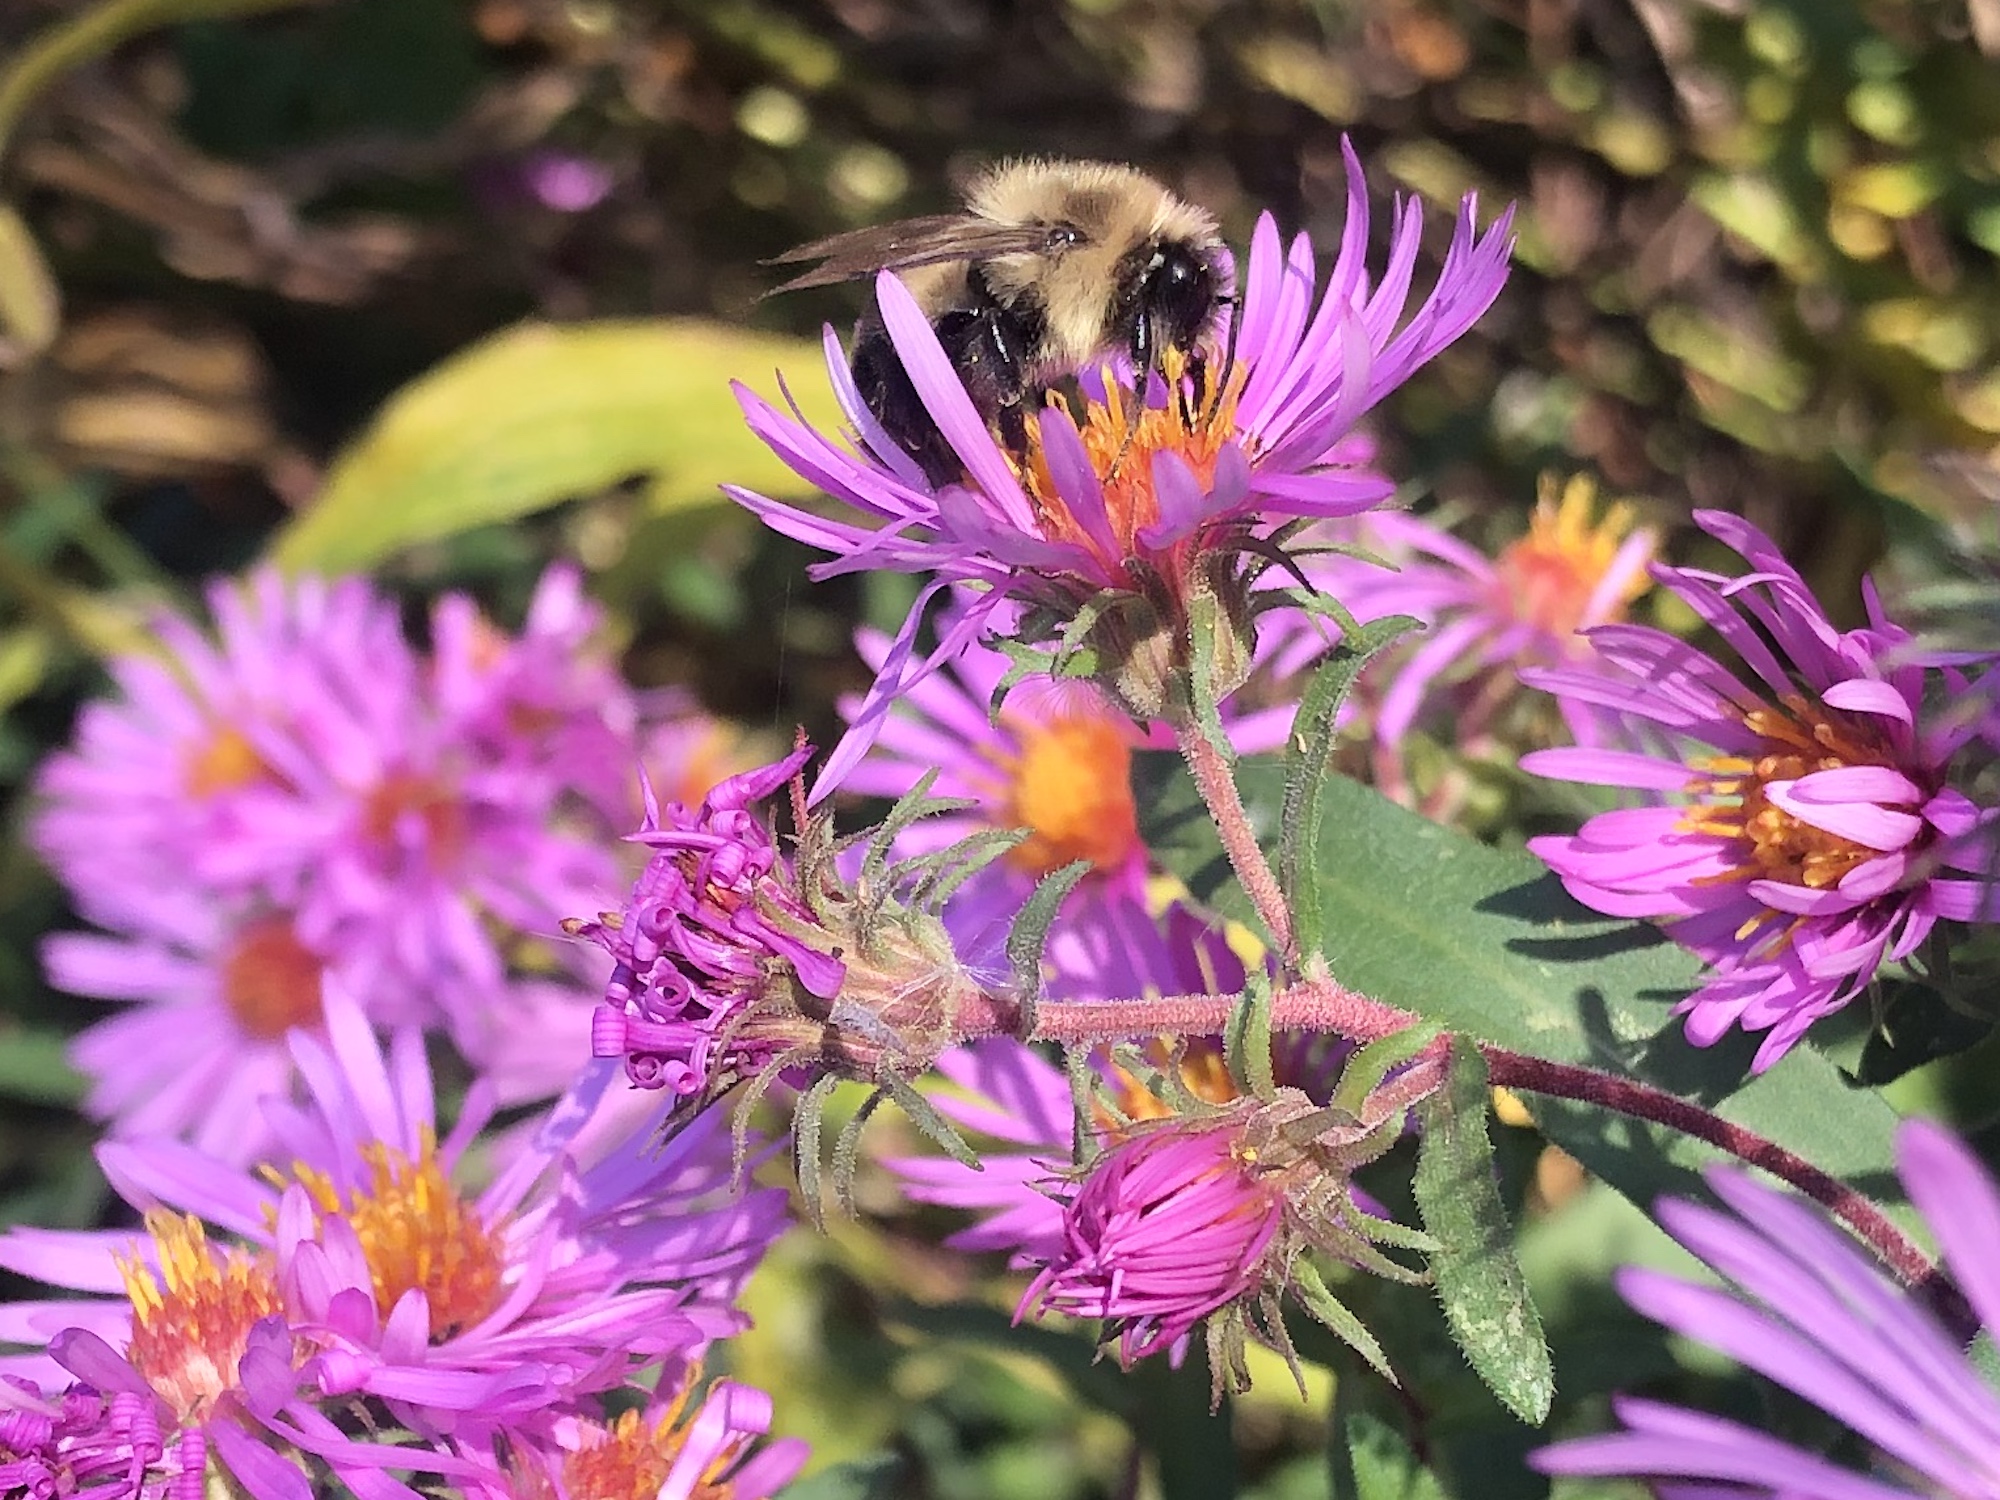 Bee on New England Aster on the bike path behind Gregory Street in Madison, Wisconsin on October 23, 2022.